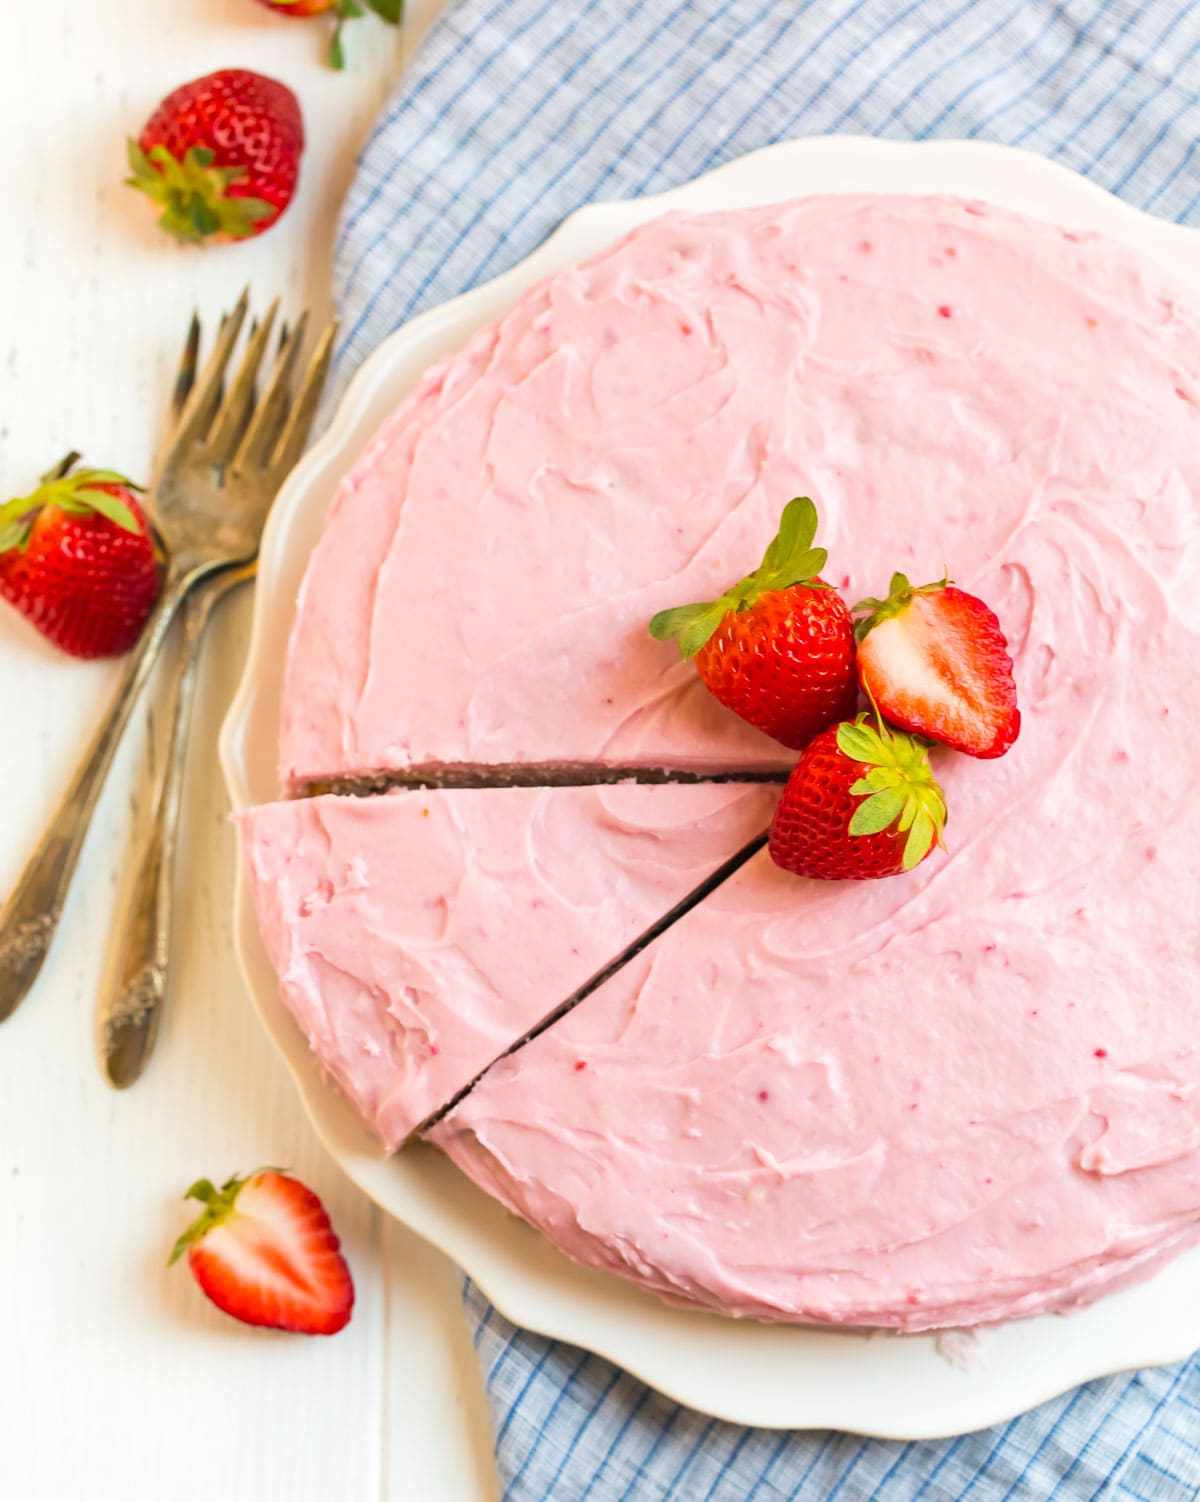 100% From Scratch Fresh Strawberry Cake With Strawberry - Bite Size Strawberry Cake - HD Wallpaper 